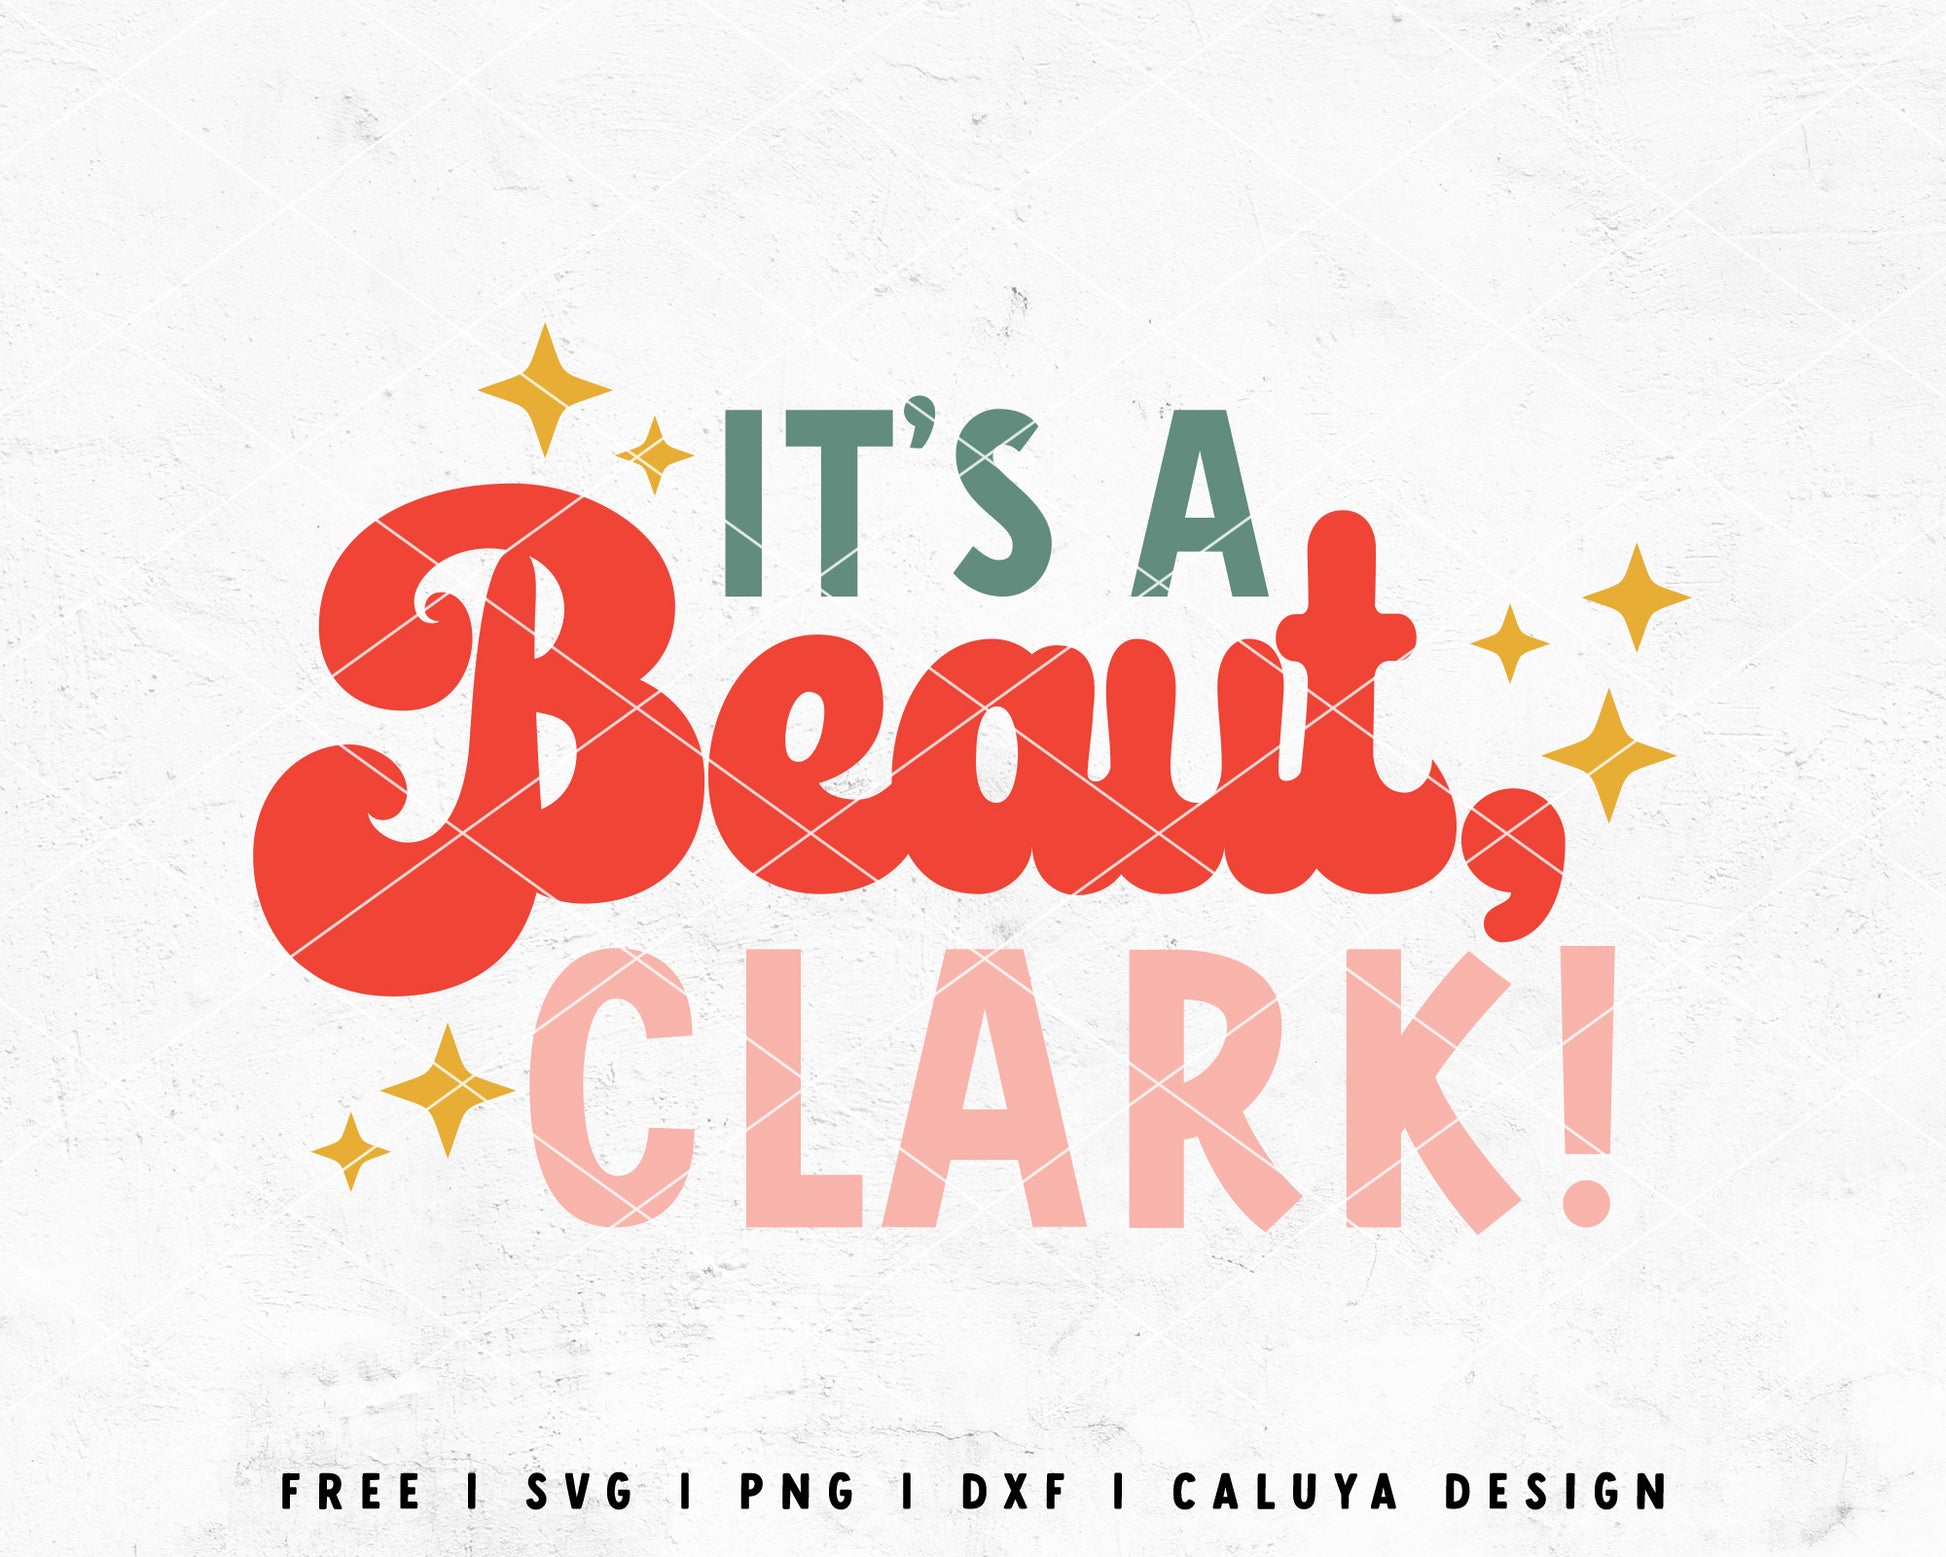 FREE It's Beaut, Clark SVG | Christmas Quote SVG Cut File for Cricut, Cameo Silhouette | Free SVG Cut File